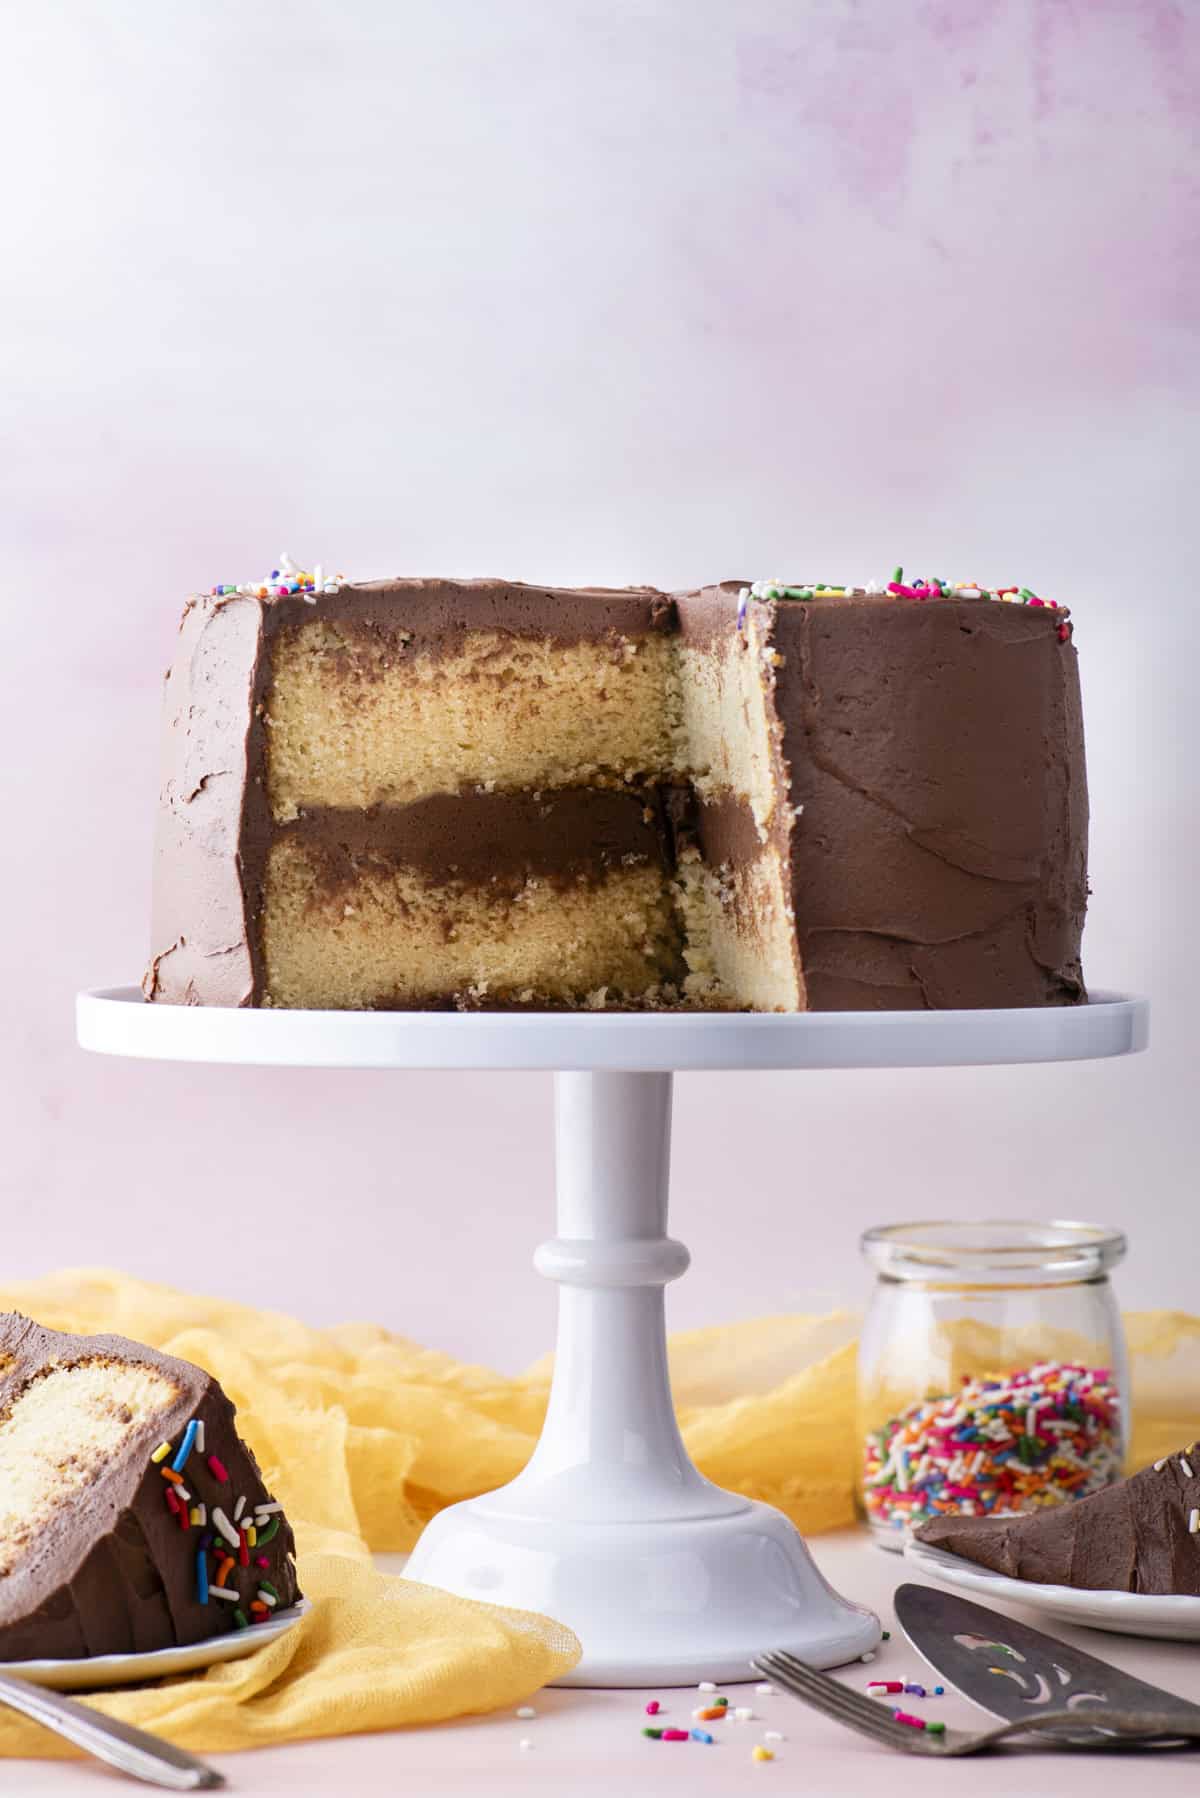 a two layer cake with chocolate frosting and rainbow sprinkles on top, on a white cake stand, with a yellow cloth, two plates with slices of cake, a fork and metal serving spatula, and a clear glass jar of rainbox sprinkles beneath it